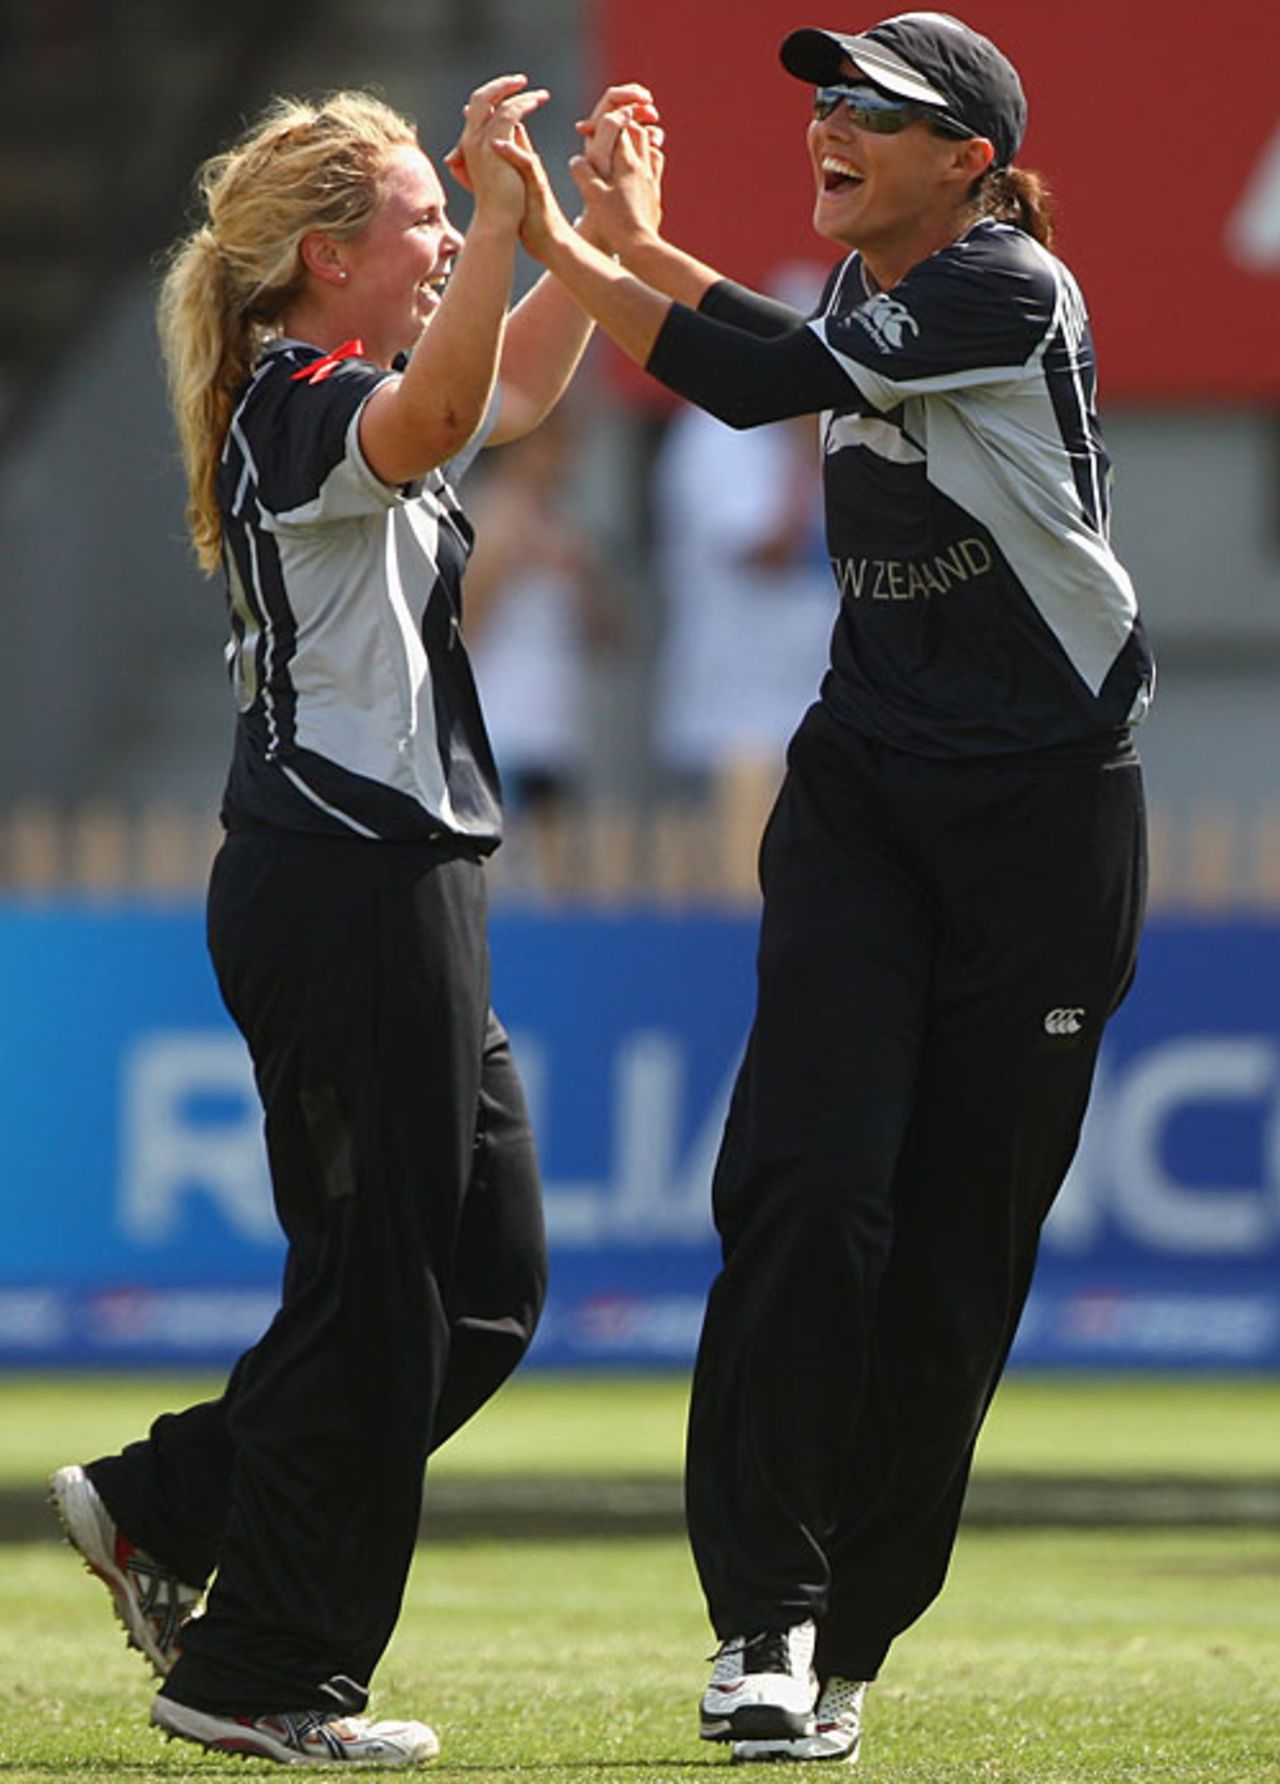 Lucy Doolan celebrates the wicket of Sarah Taylor, England v New Zealand, women's World Cup final, Sydney, March 22, 2009